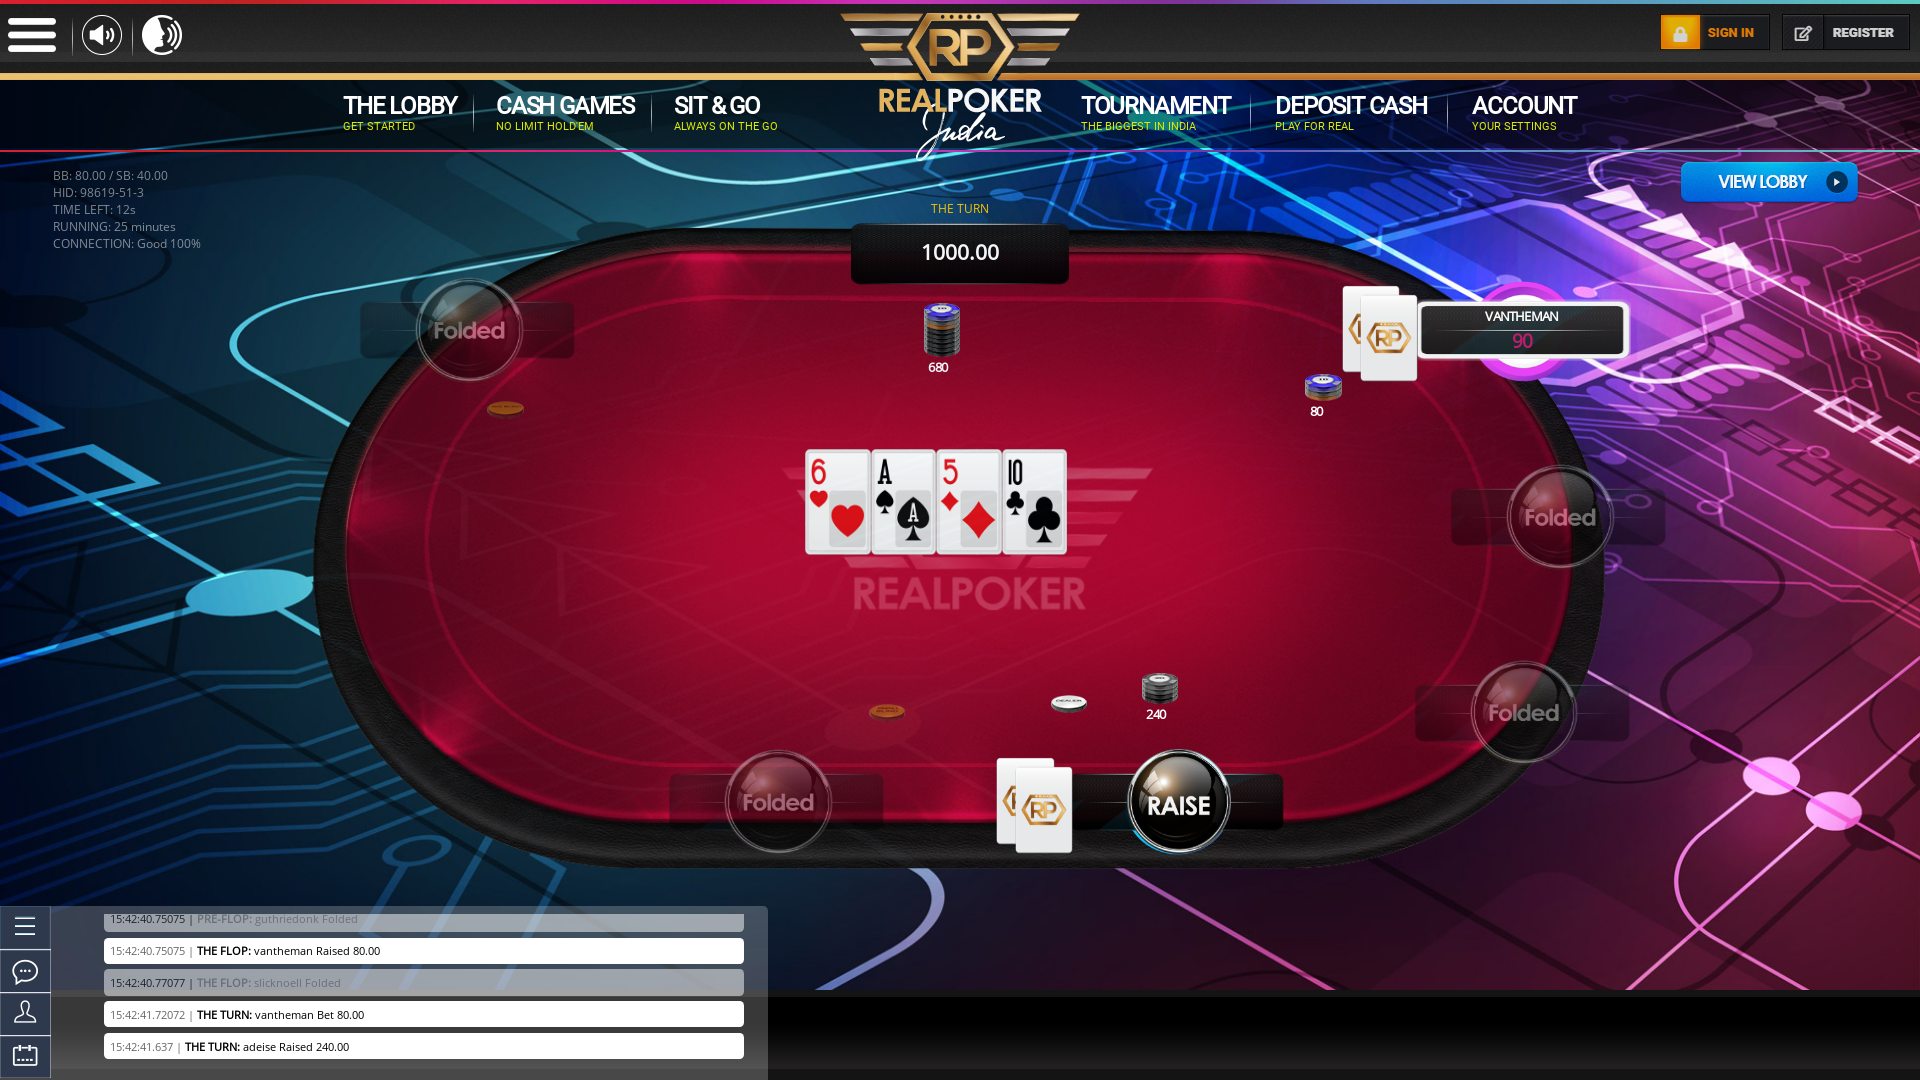 10 player poker in the 25th minute